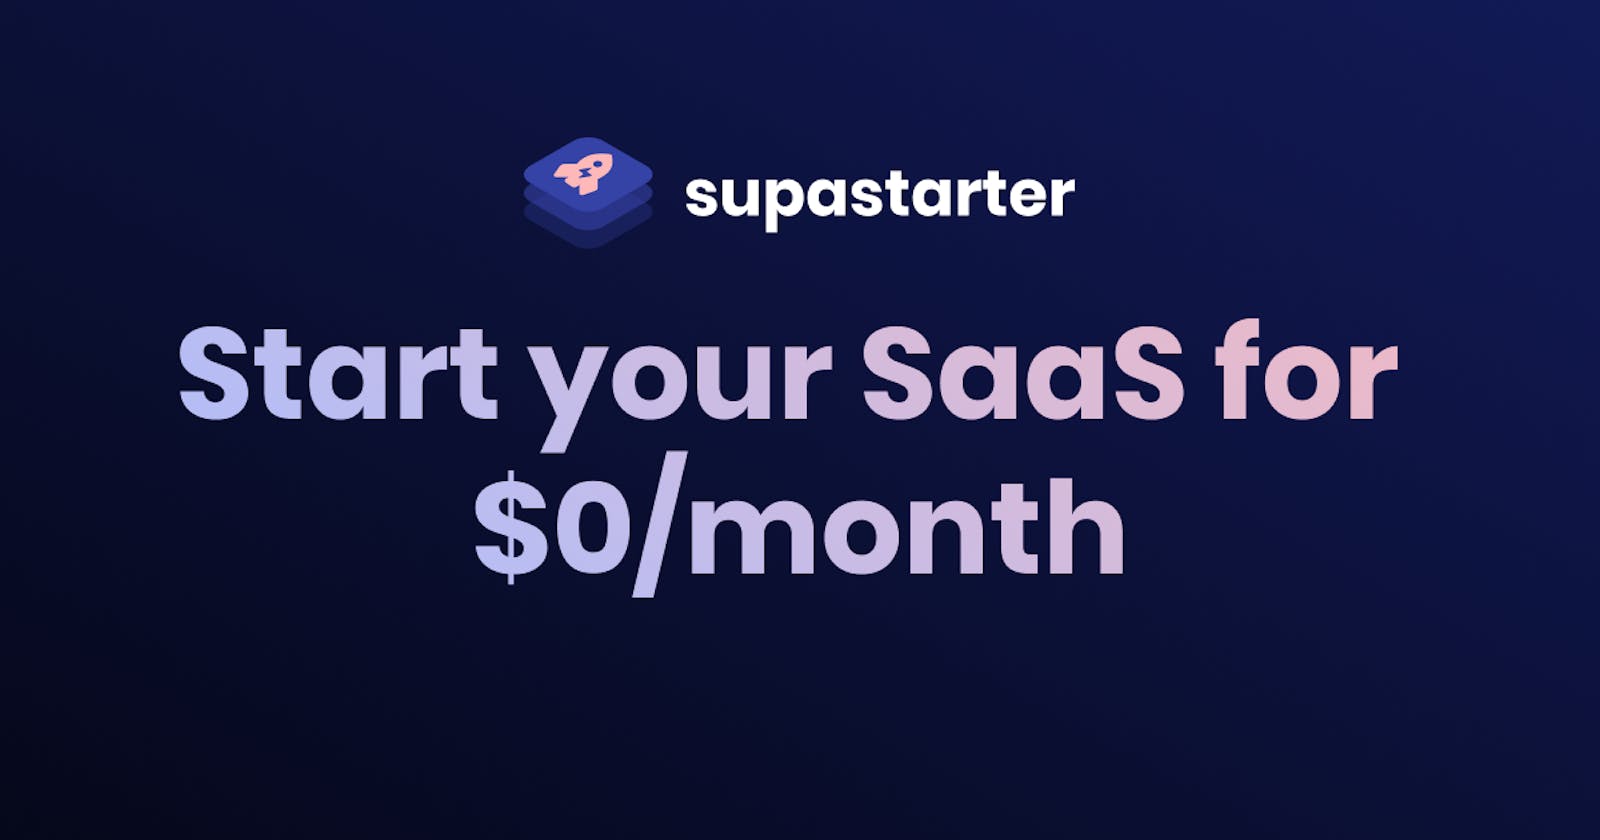 Start your SaaS for $0/month 🚀